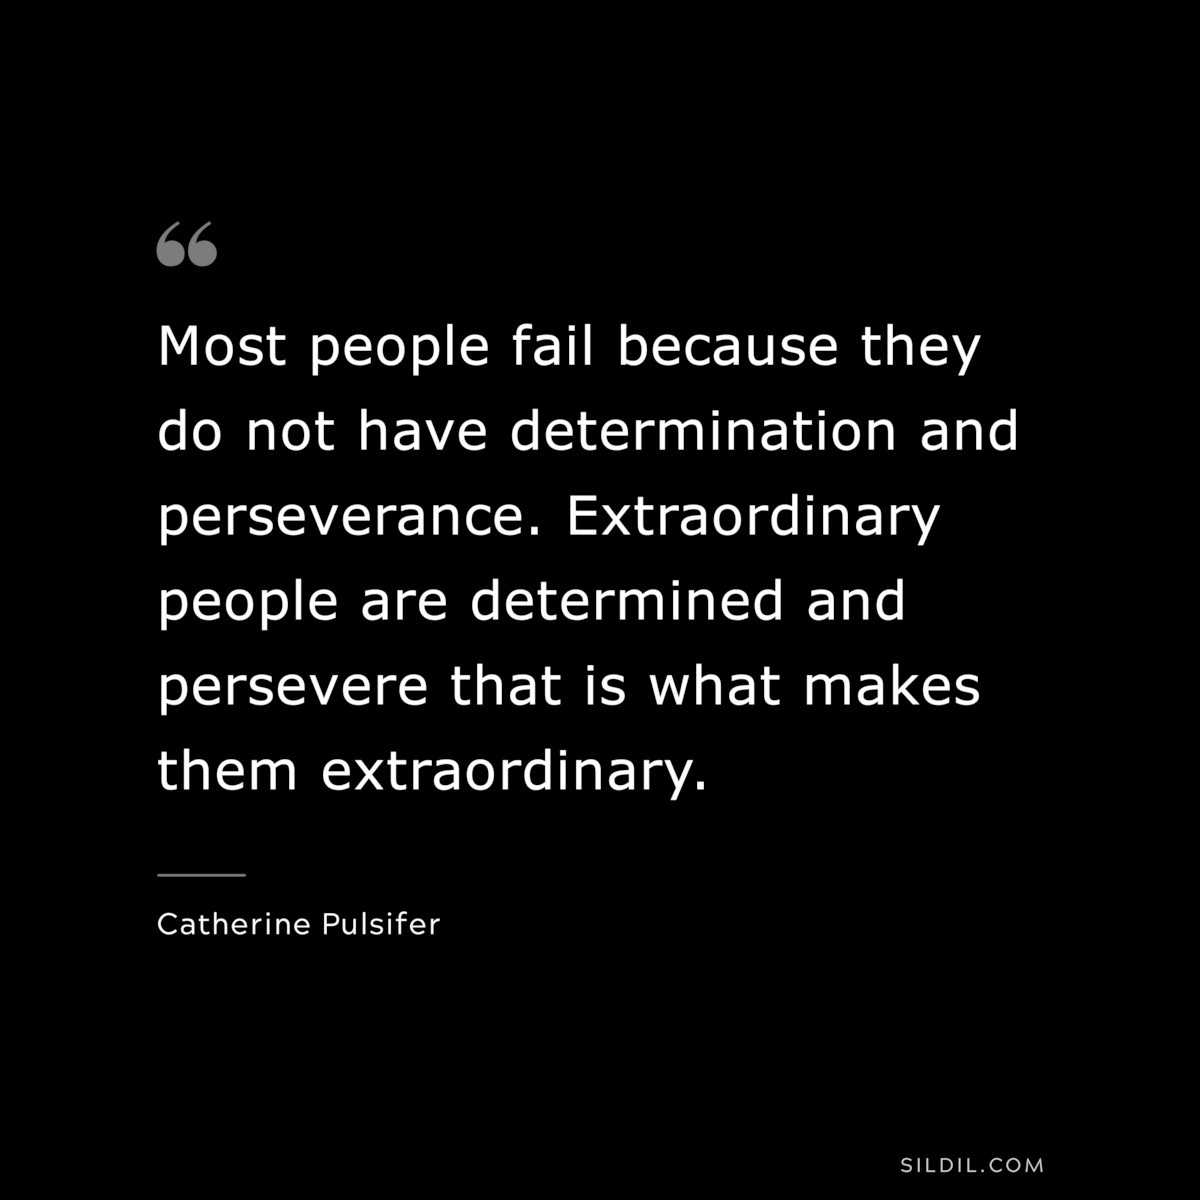 Most people fail because they do not have determination and perseverance. Extraordinary people are determined and persevere that is what makes them extraordinary. ― Catherine Pulsifer